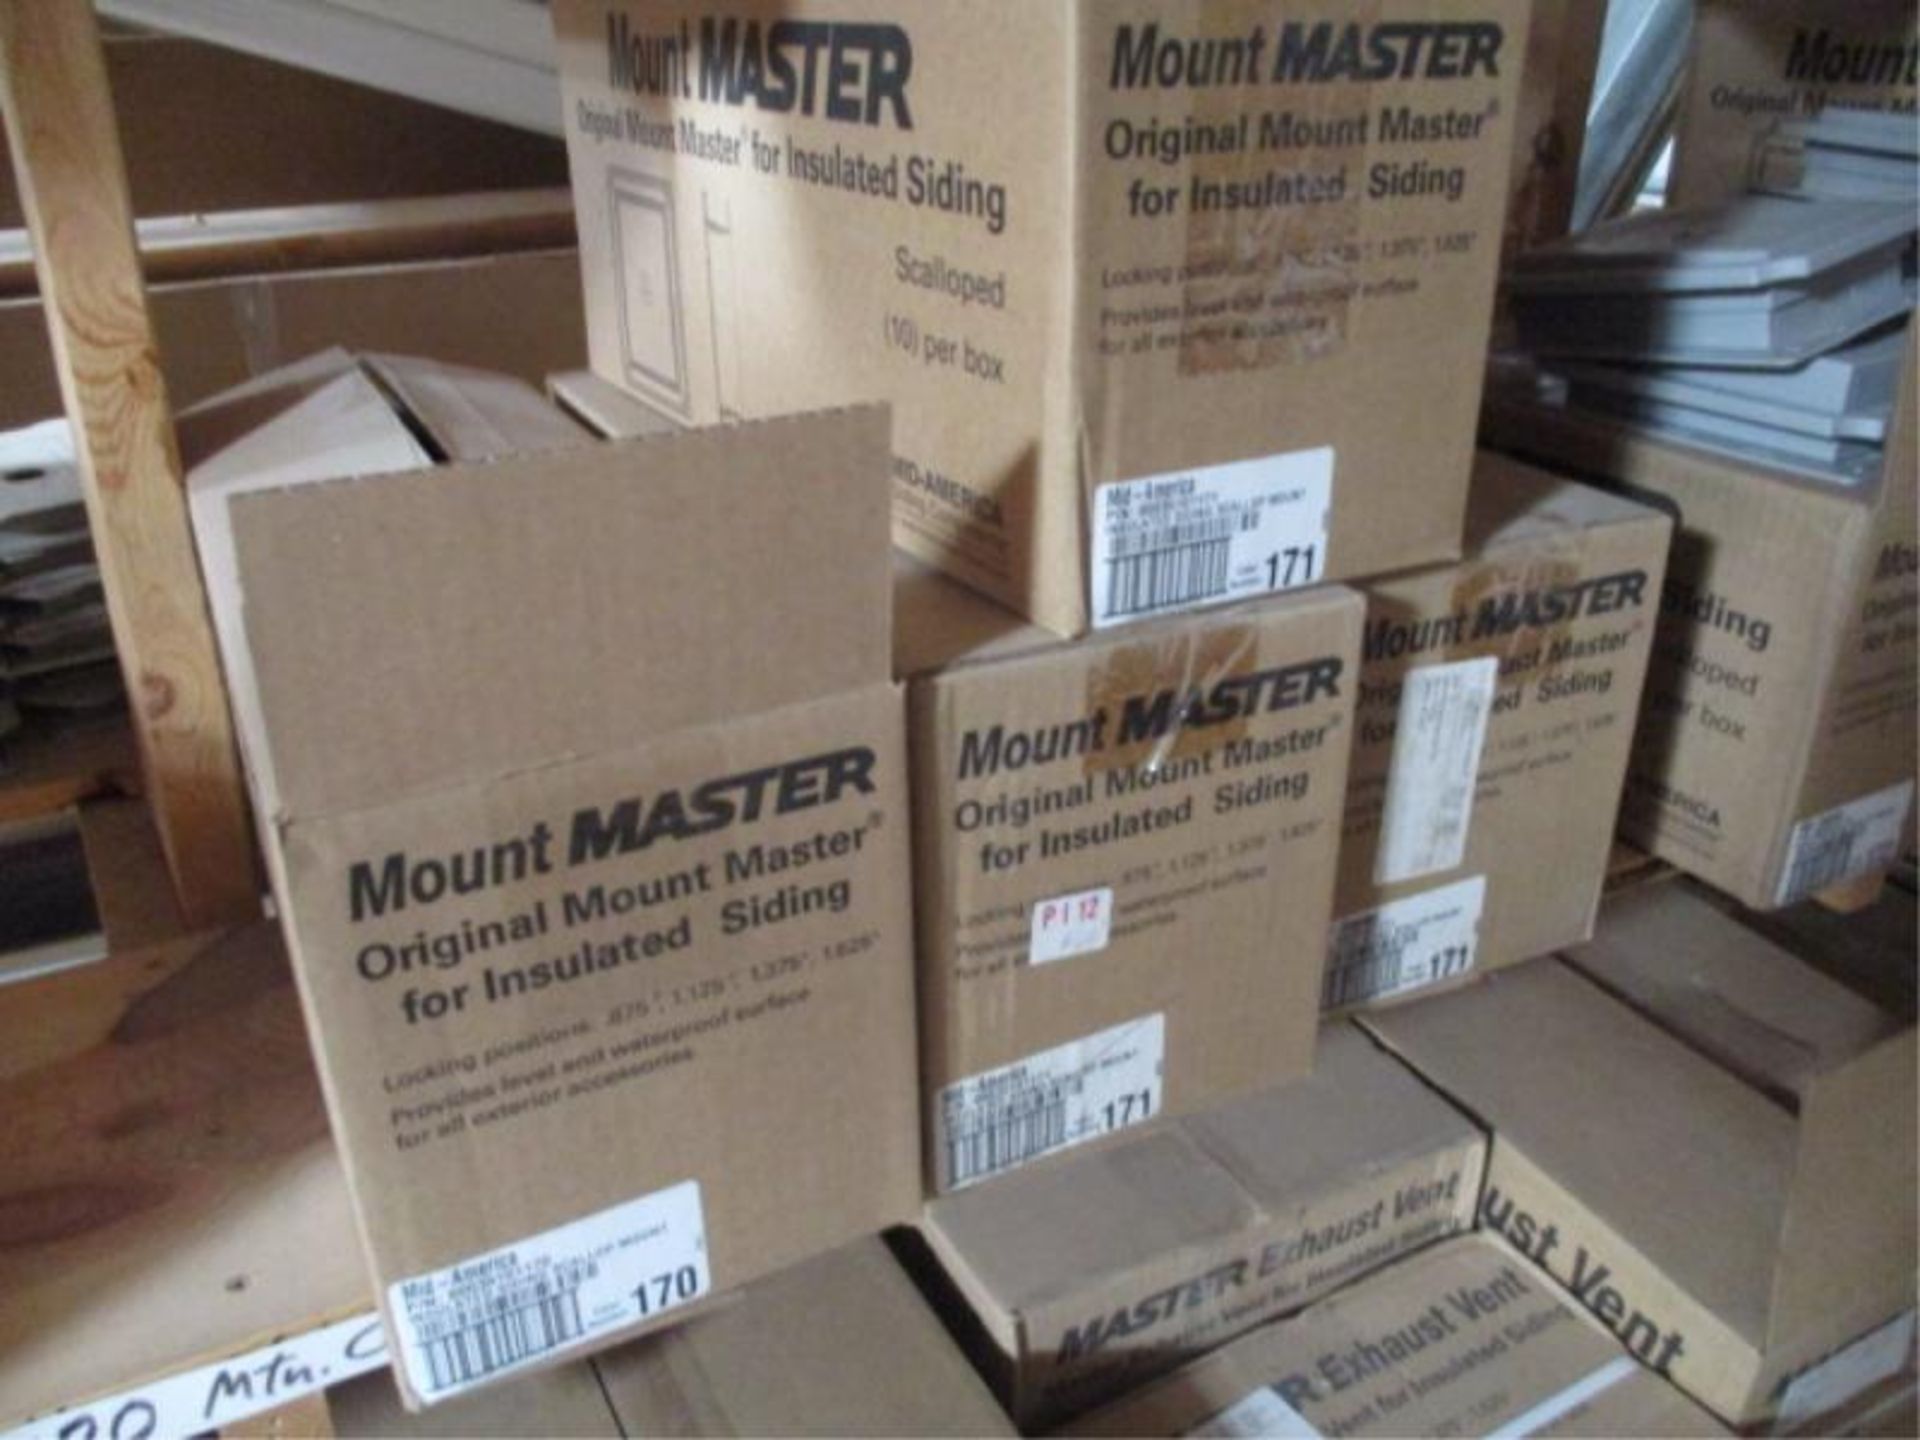 Mount master for insulated Siding (Scalloped) 16 Boxes - Bild 3 aus 4